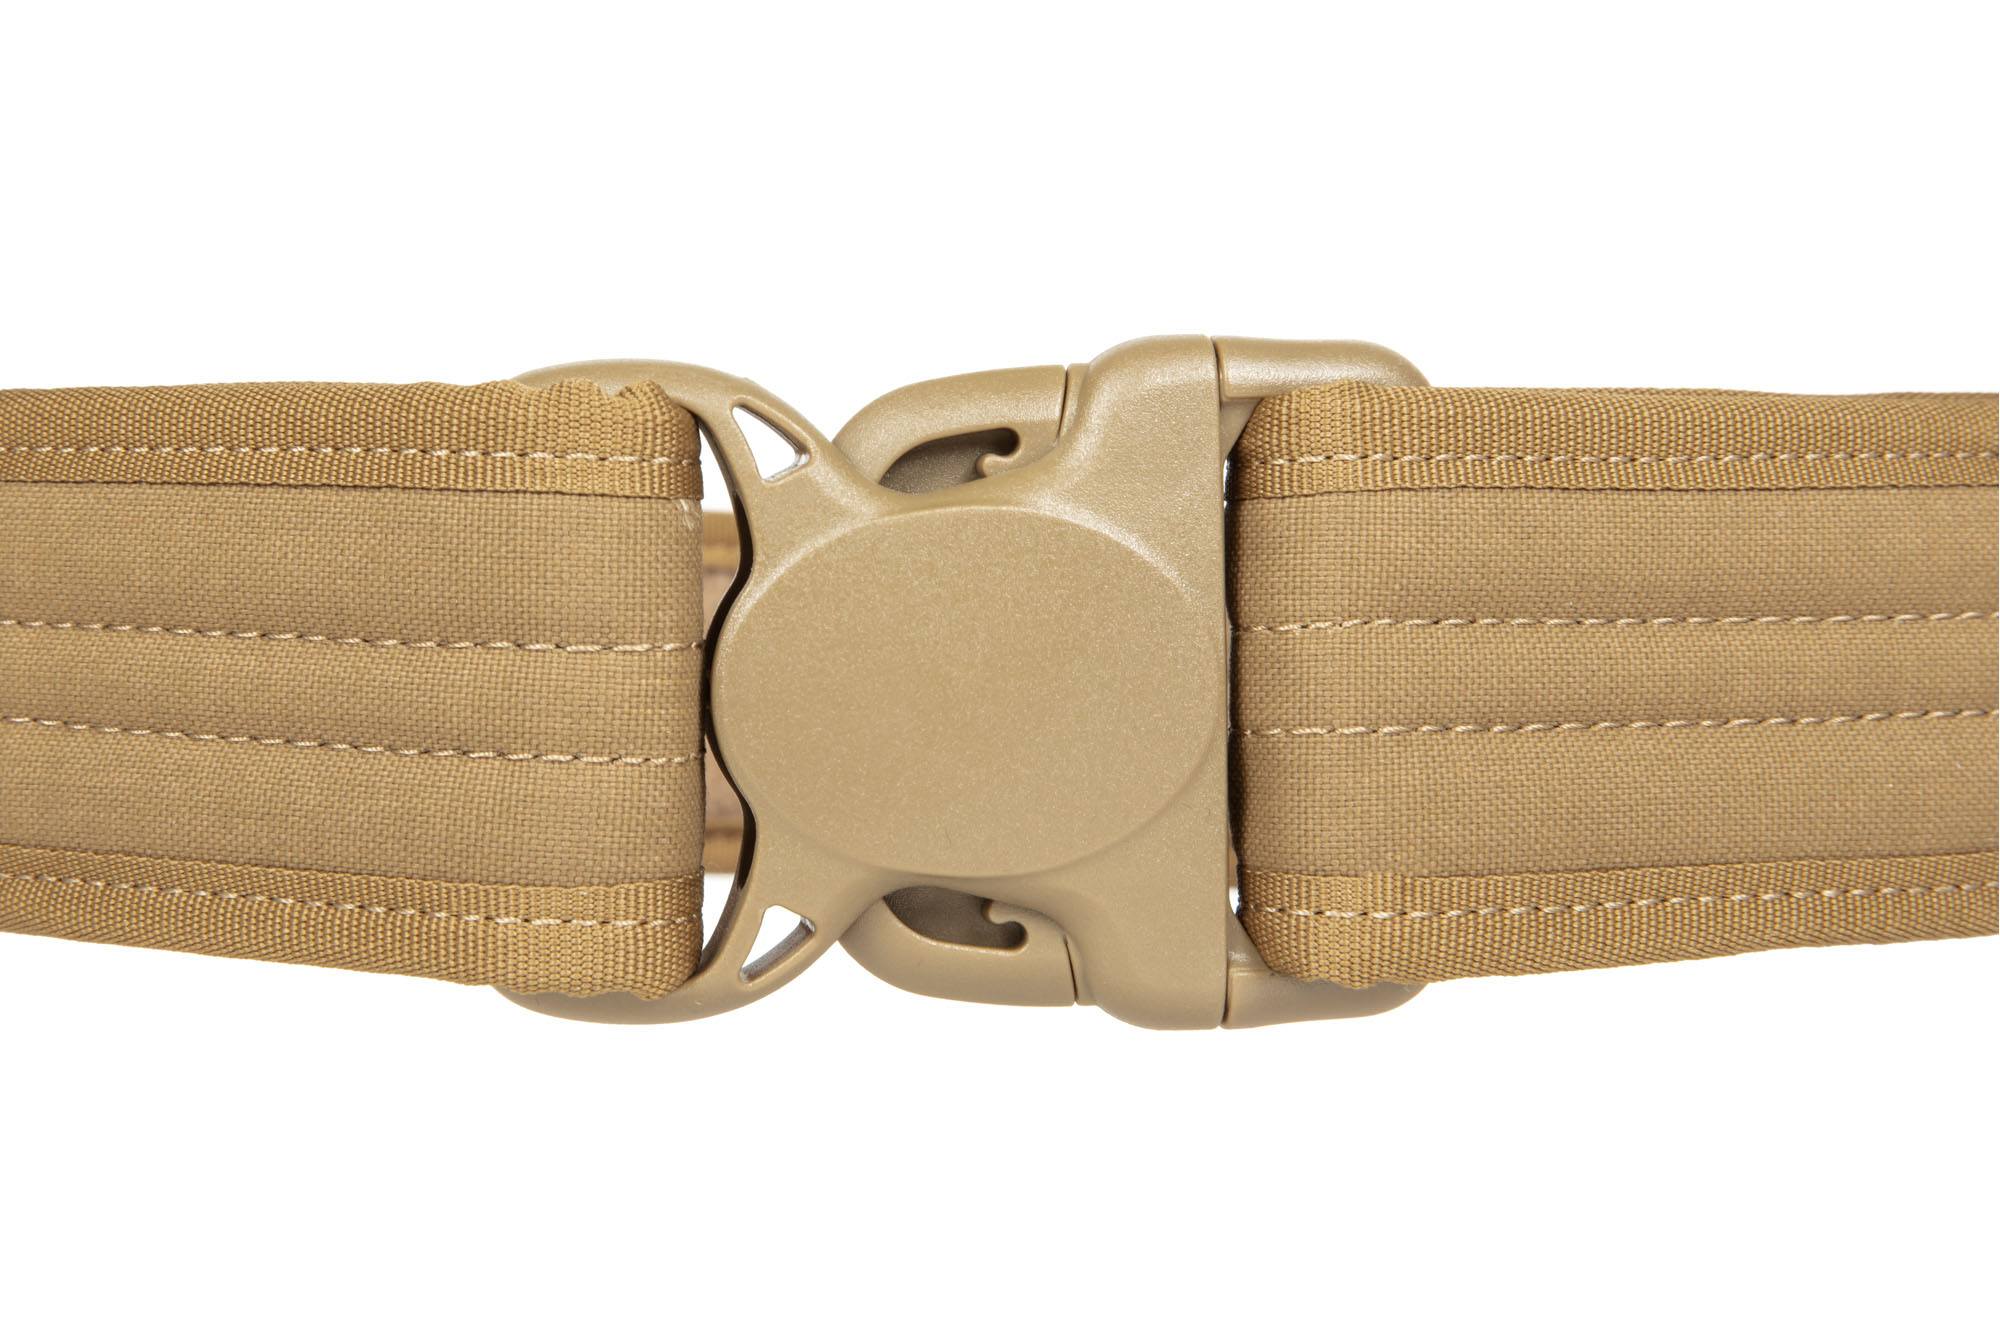 Tactical Belt Utility Tricon - Coyote Brown